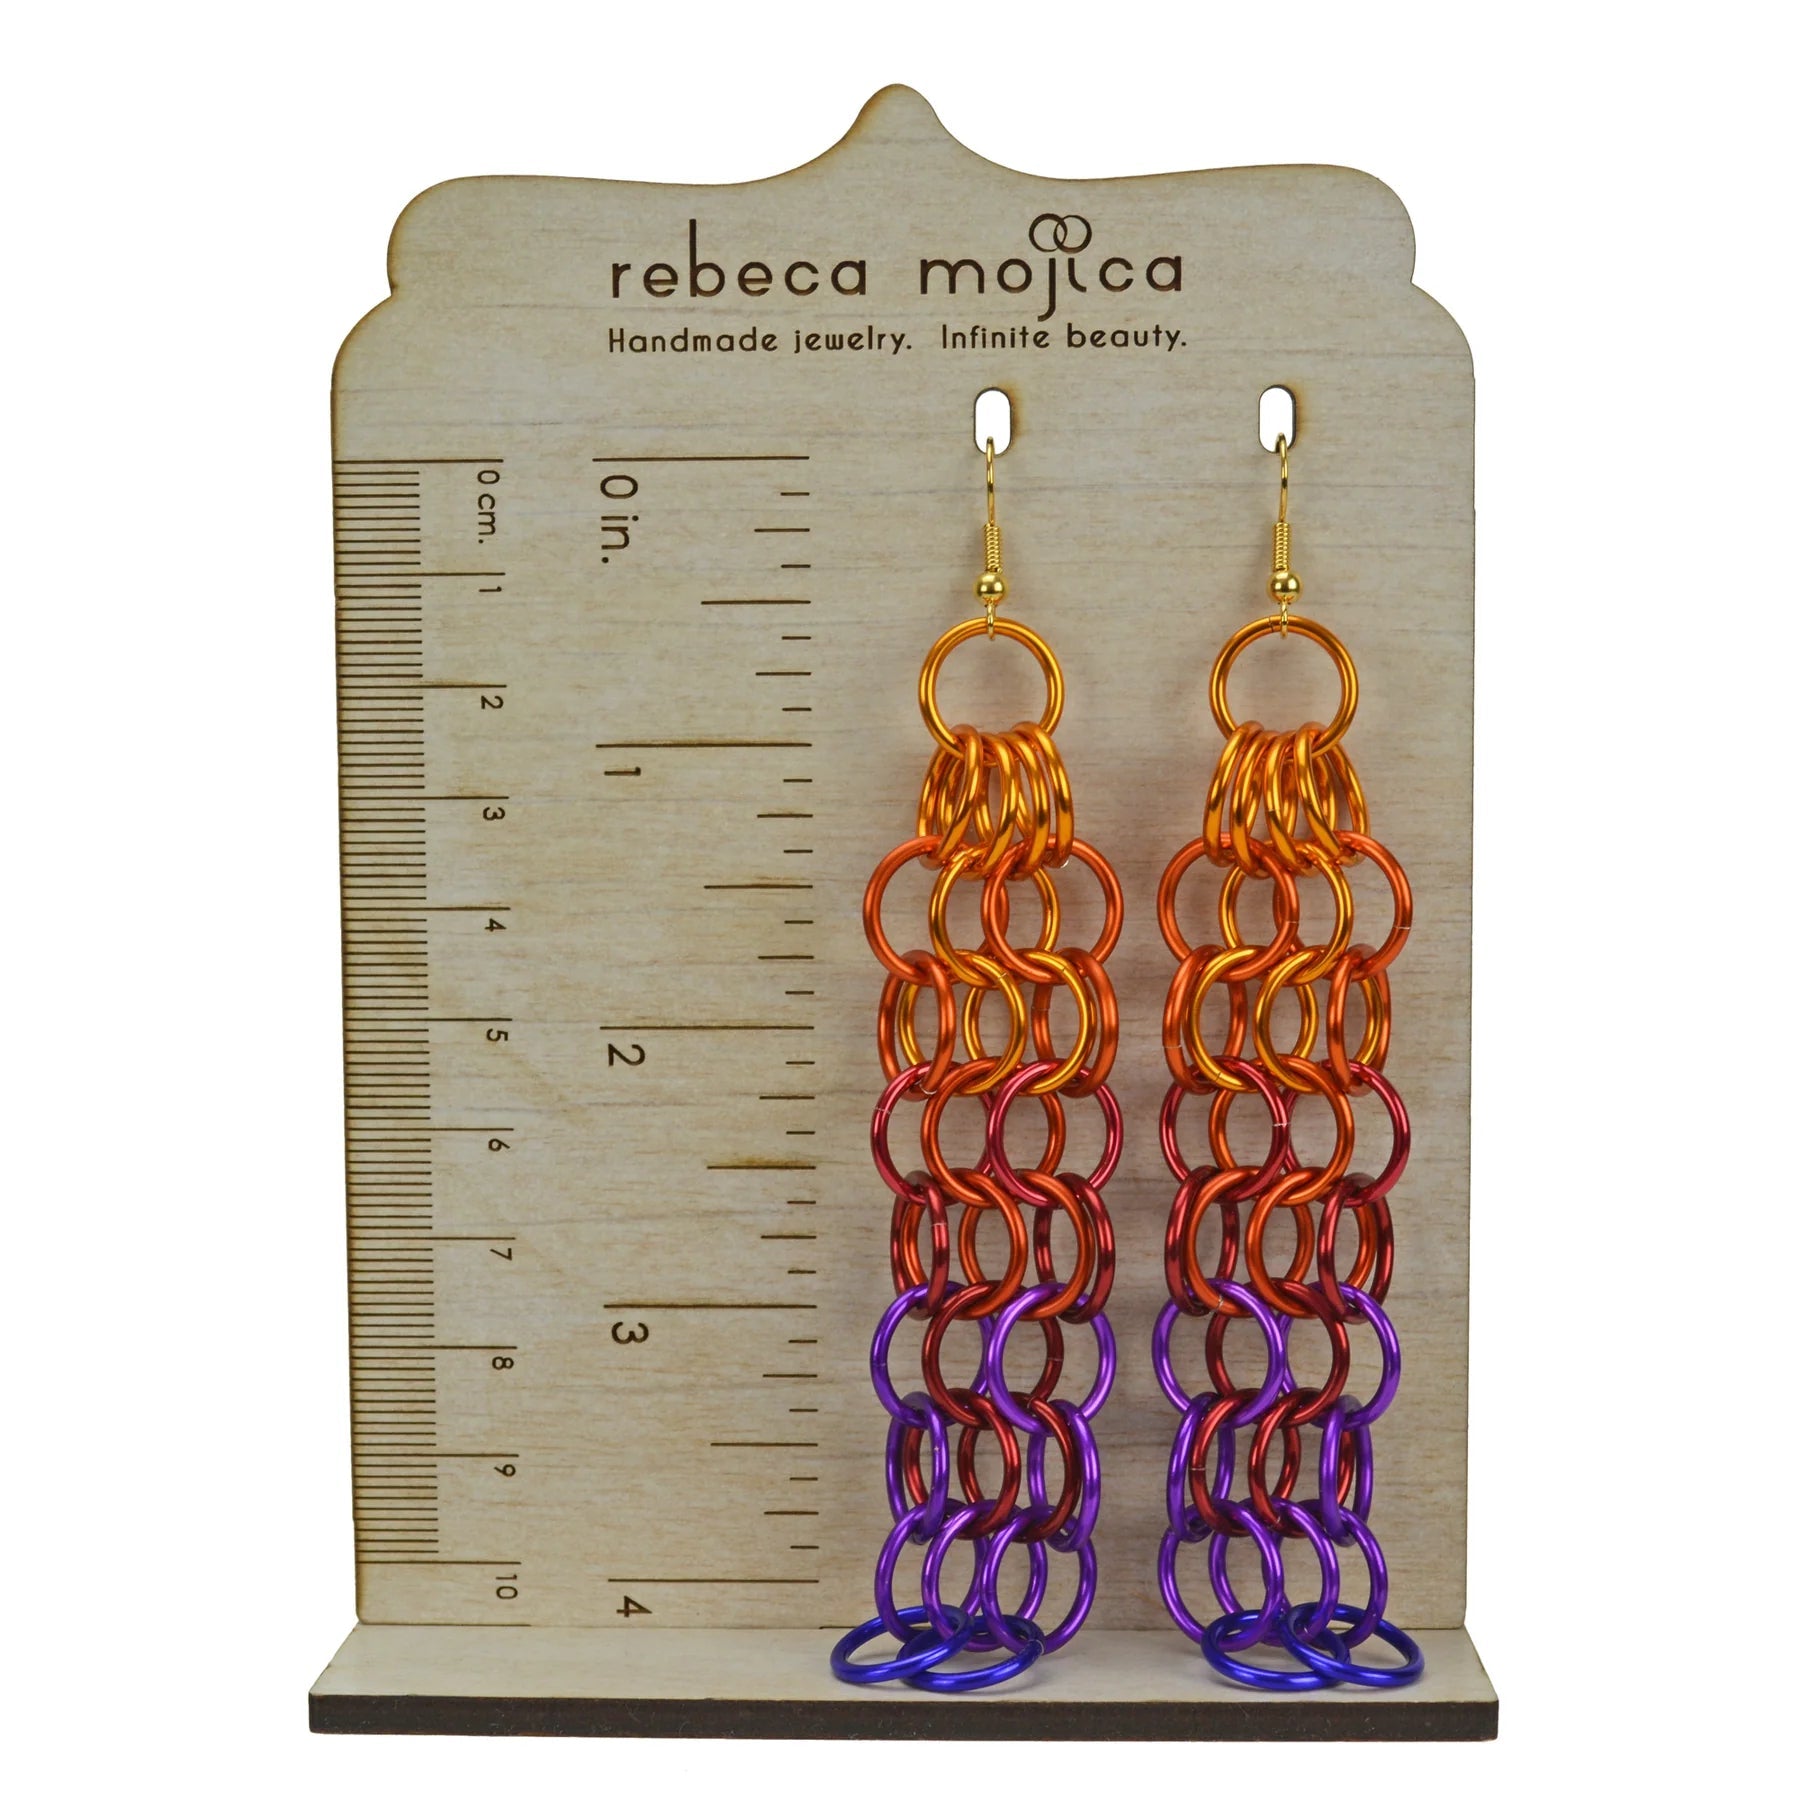 Ombre Chainmail Mesh Earrings - Sunset - dom+bomb